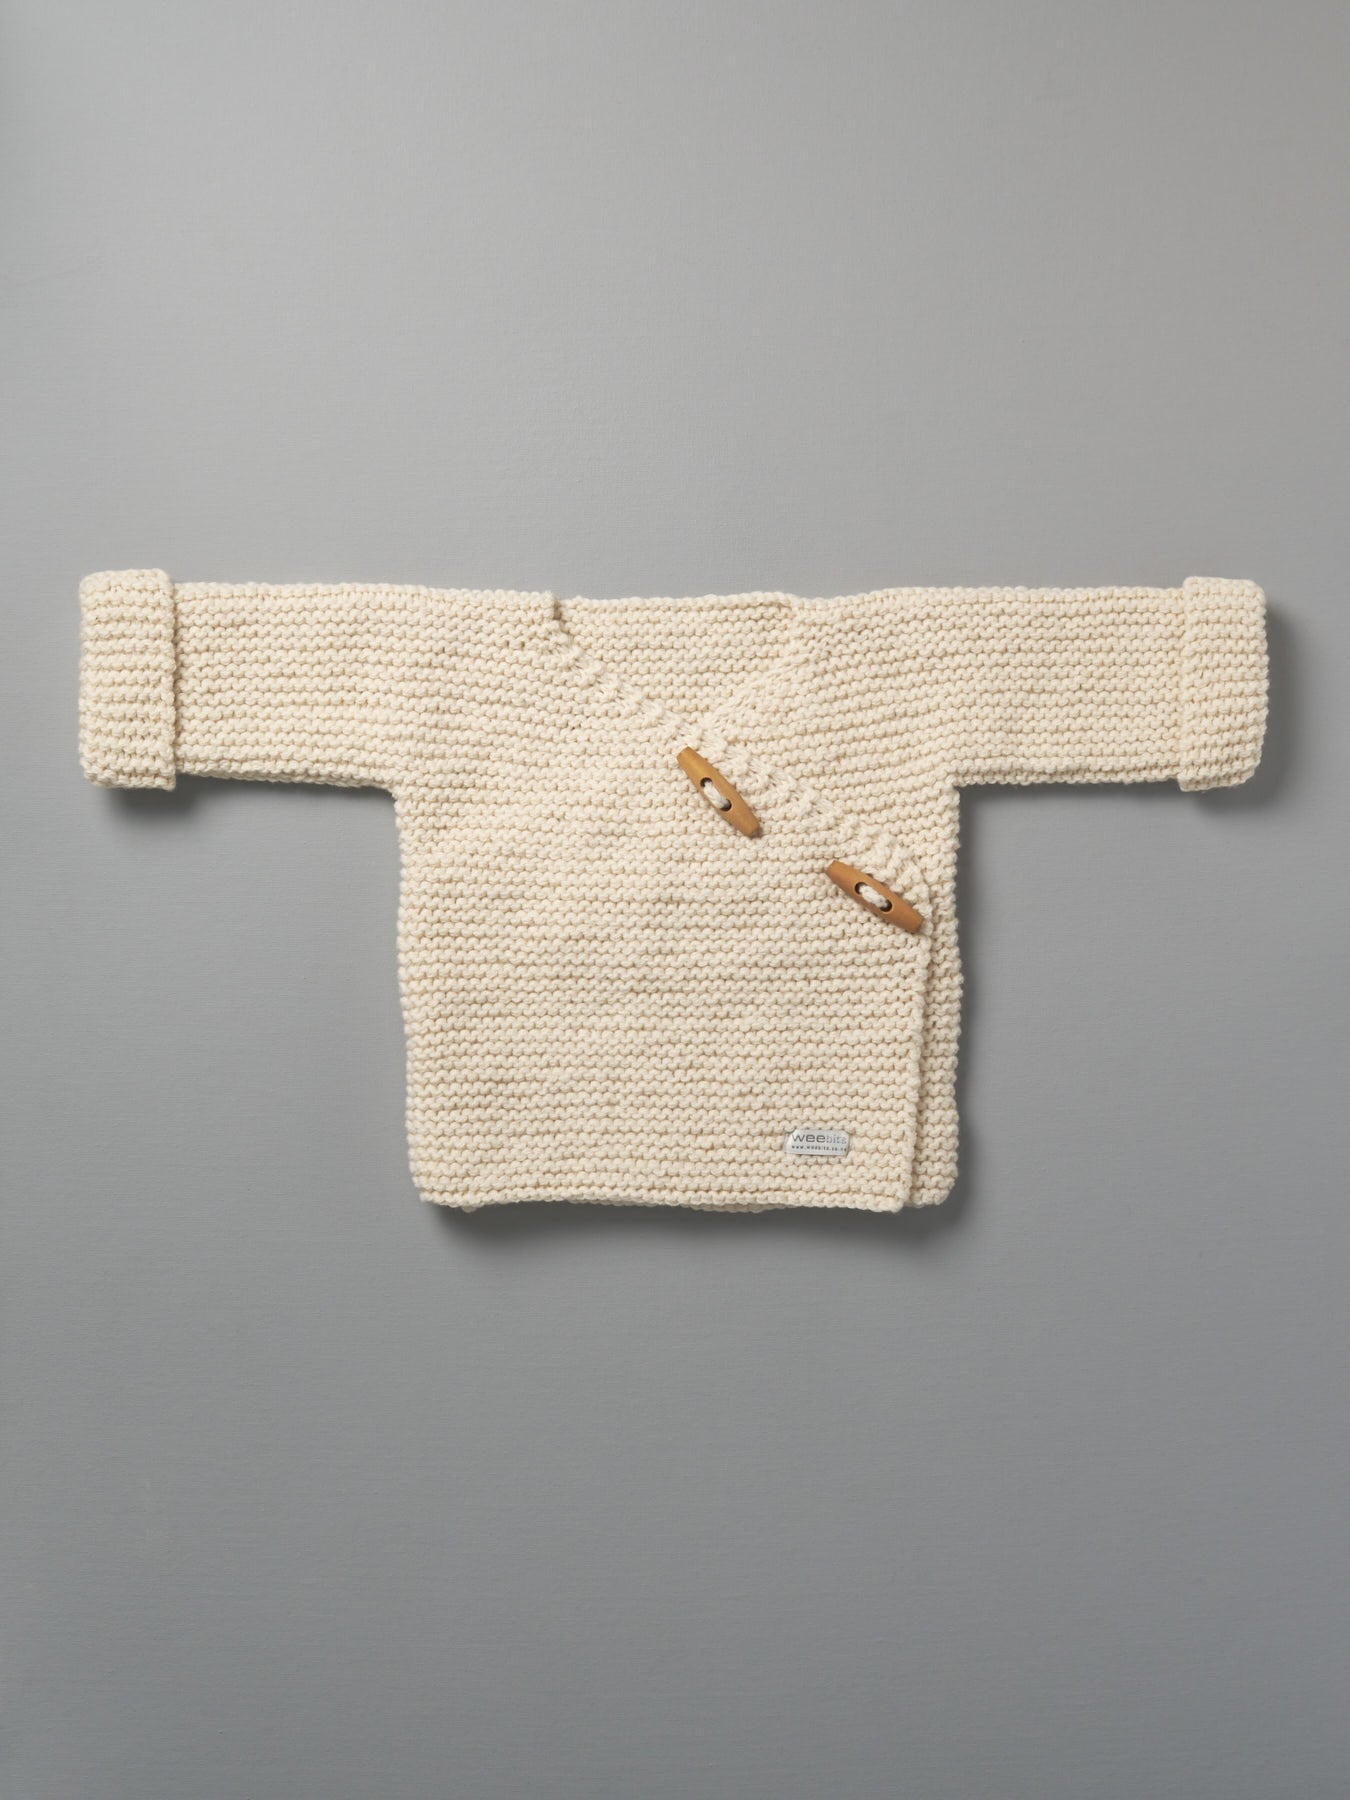 A Weebits Hand Knitted Double Breasted Jacket - Natural hanging on a gray background.